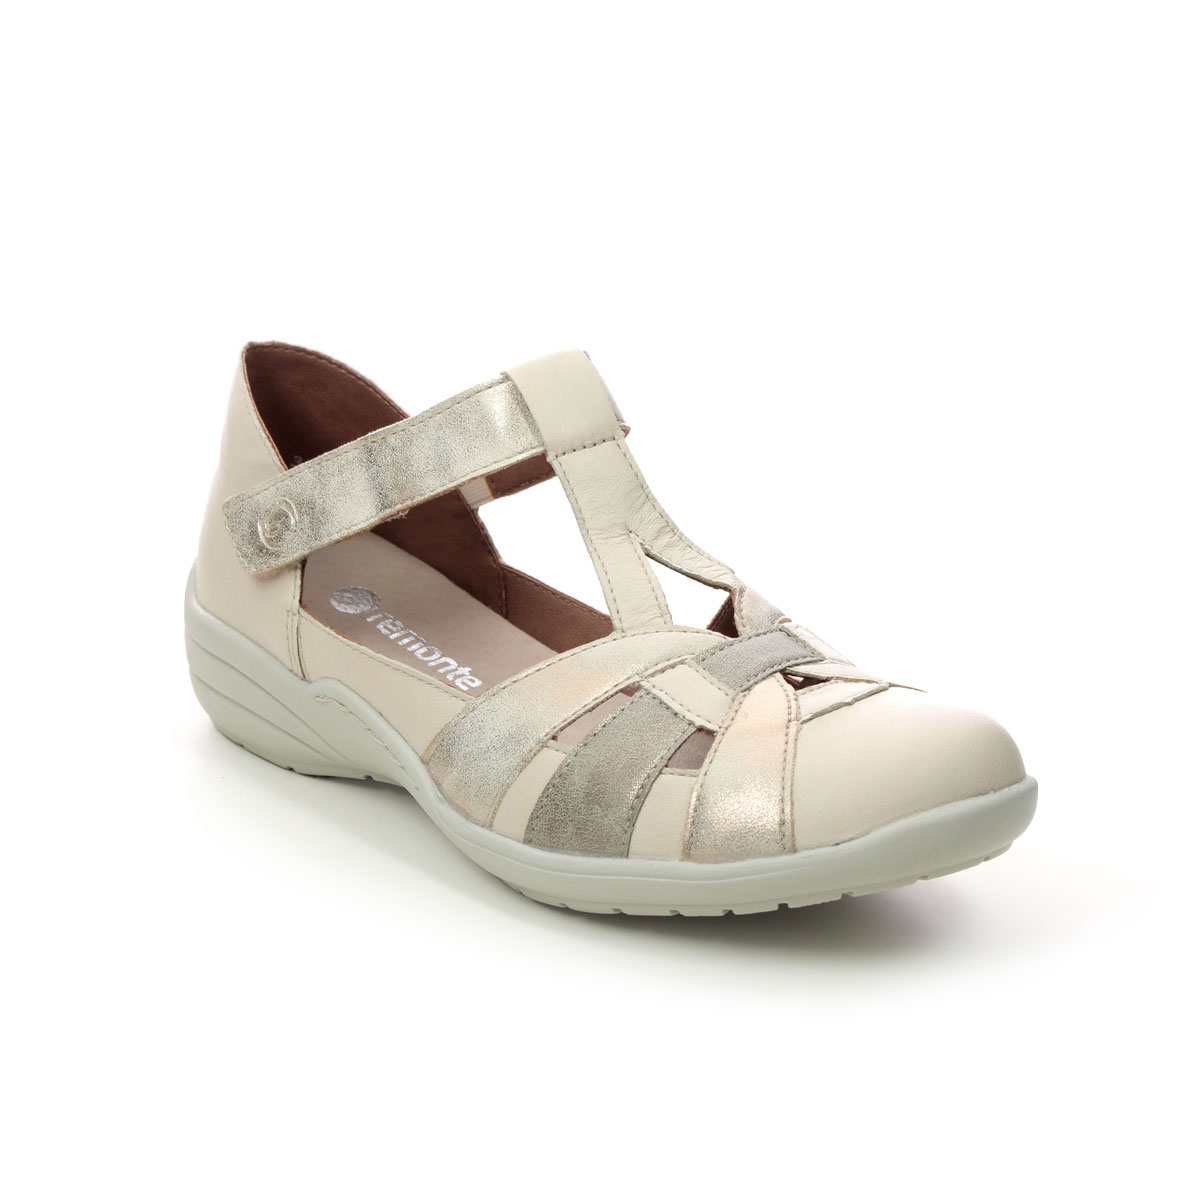 Remonte R7601-80 Bertavall Beige leather Womens Closed Toe Sandals in a Plain Leather and Man-made in Size 39